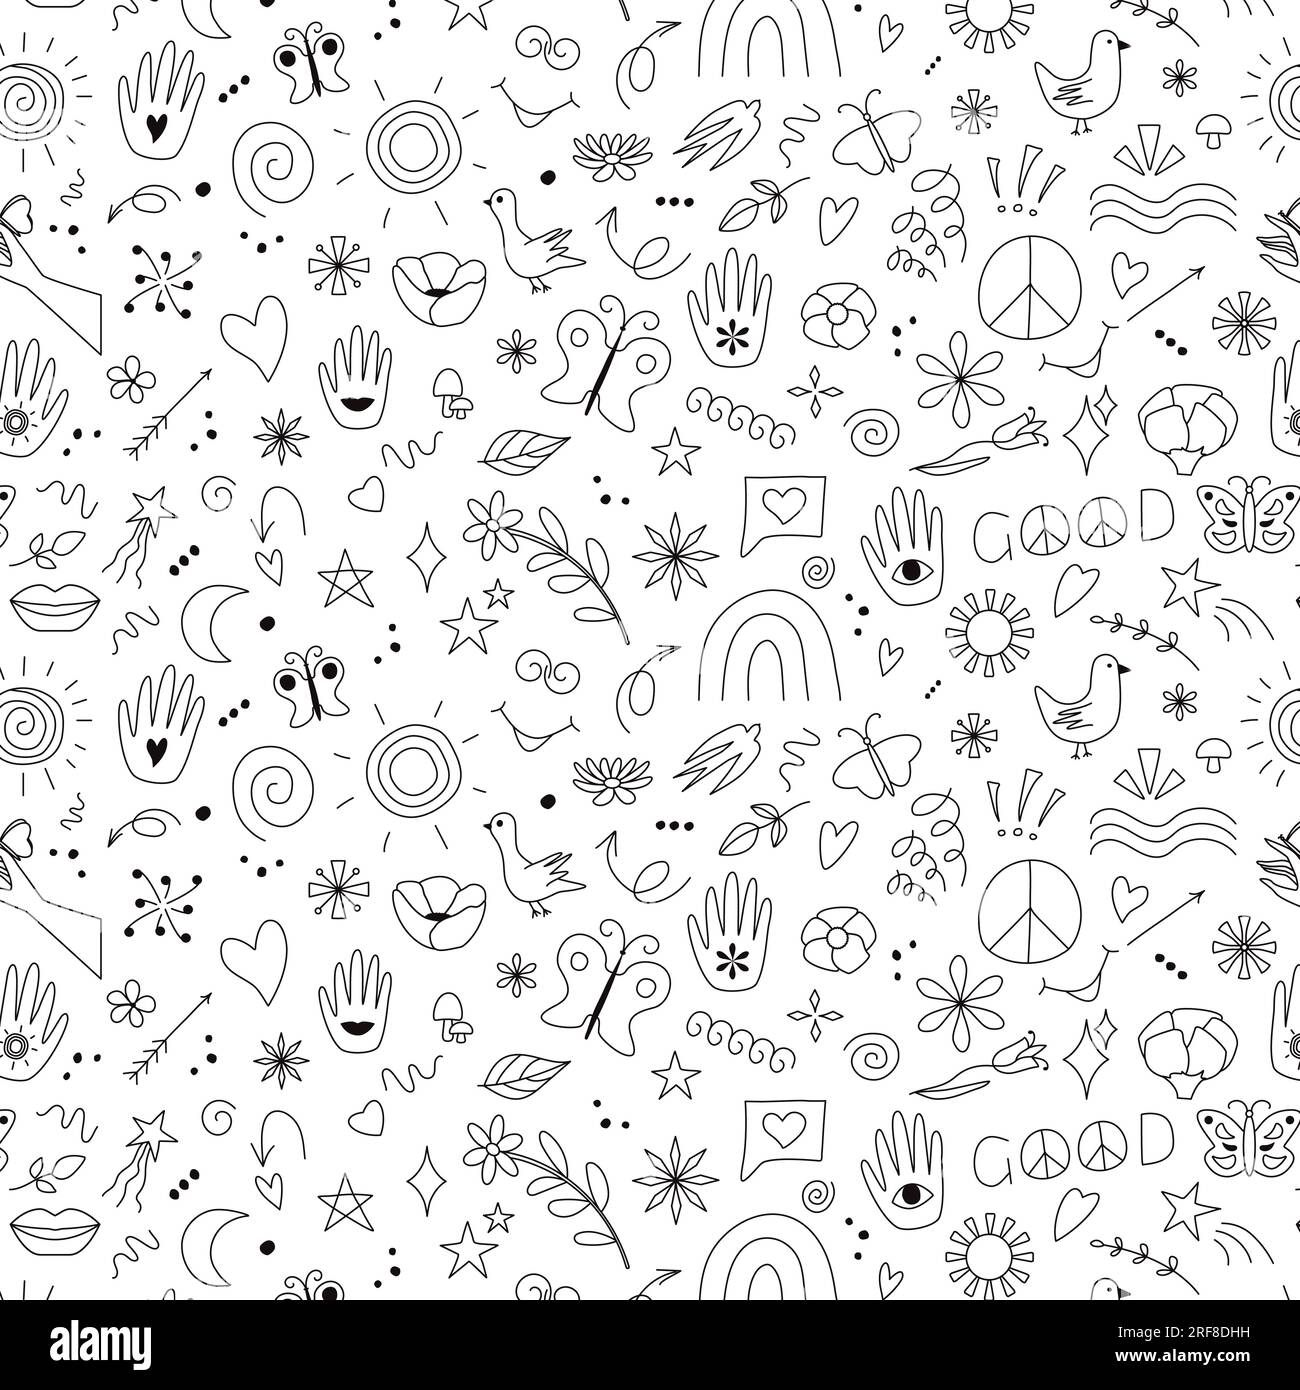 Hippie groovy background Seamless pattern Doodle style Backdrop for party decoration Black outline design Hand drawn vector illustration isolated Stock Vector